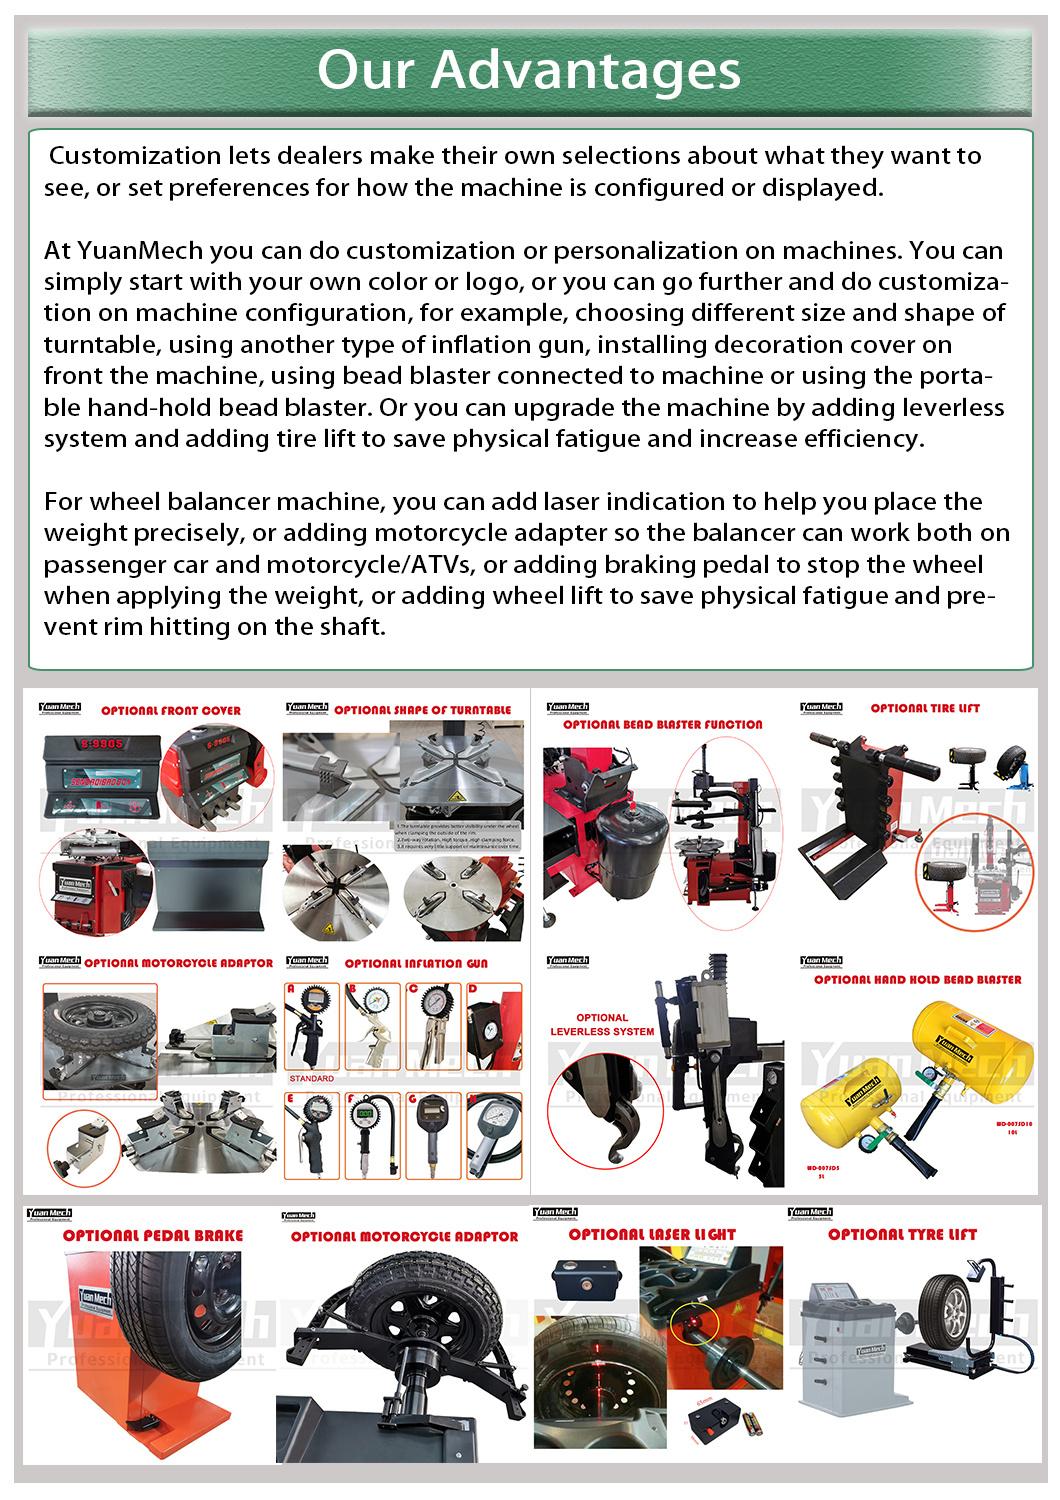 Garage Equipment Solution Design Tire Service Tools Tire Shop Tire Changer and Balancer Combo